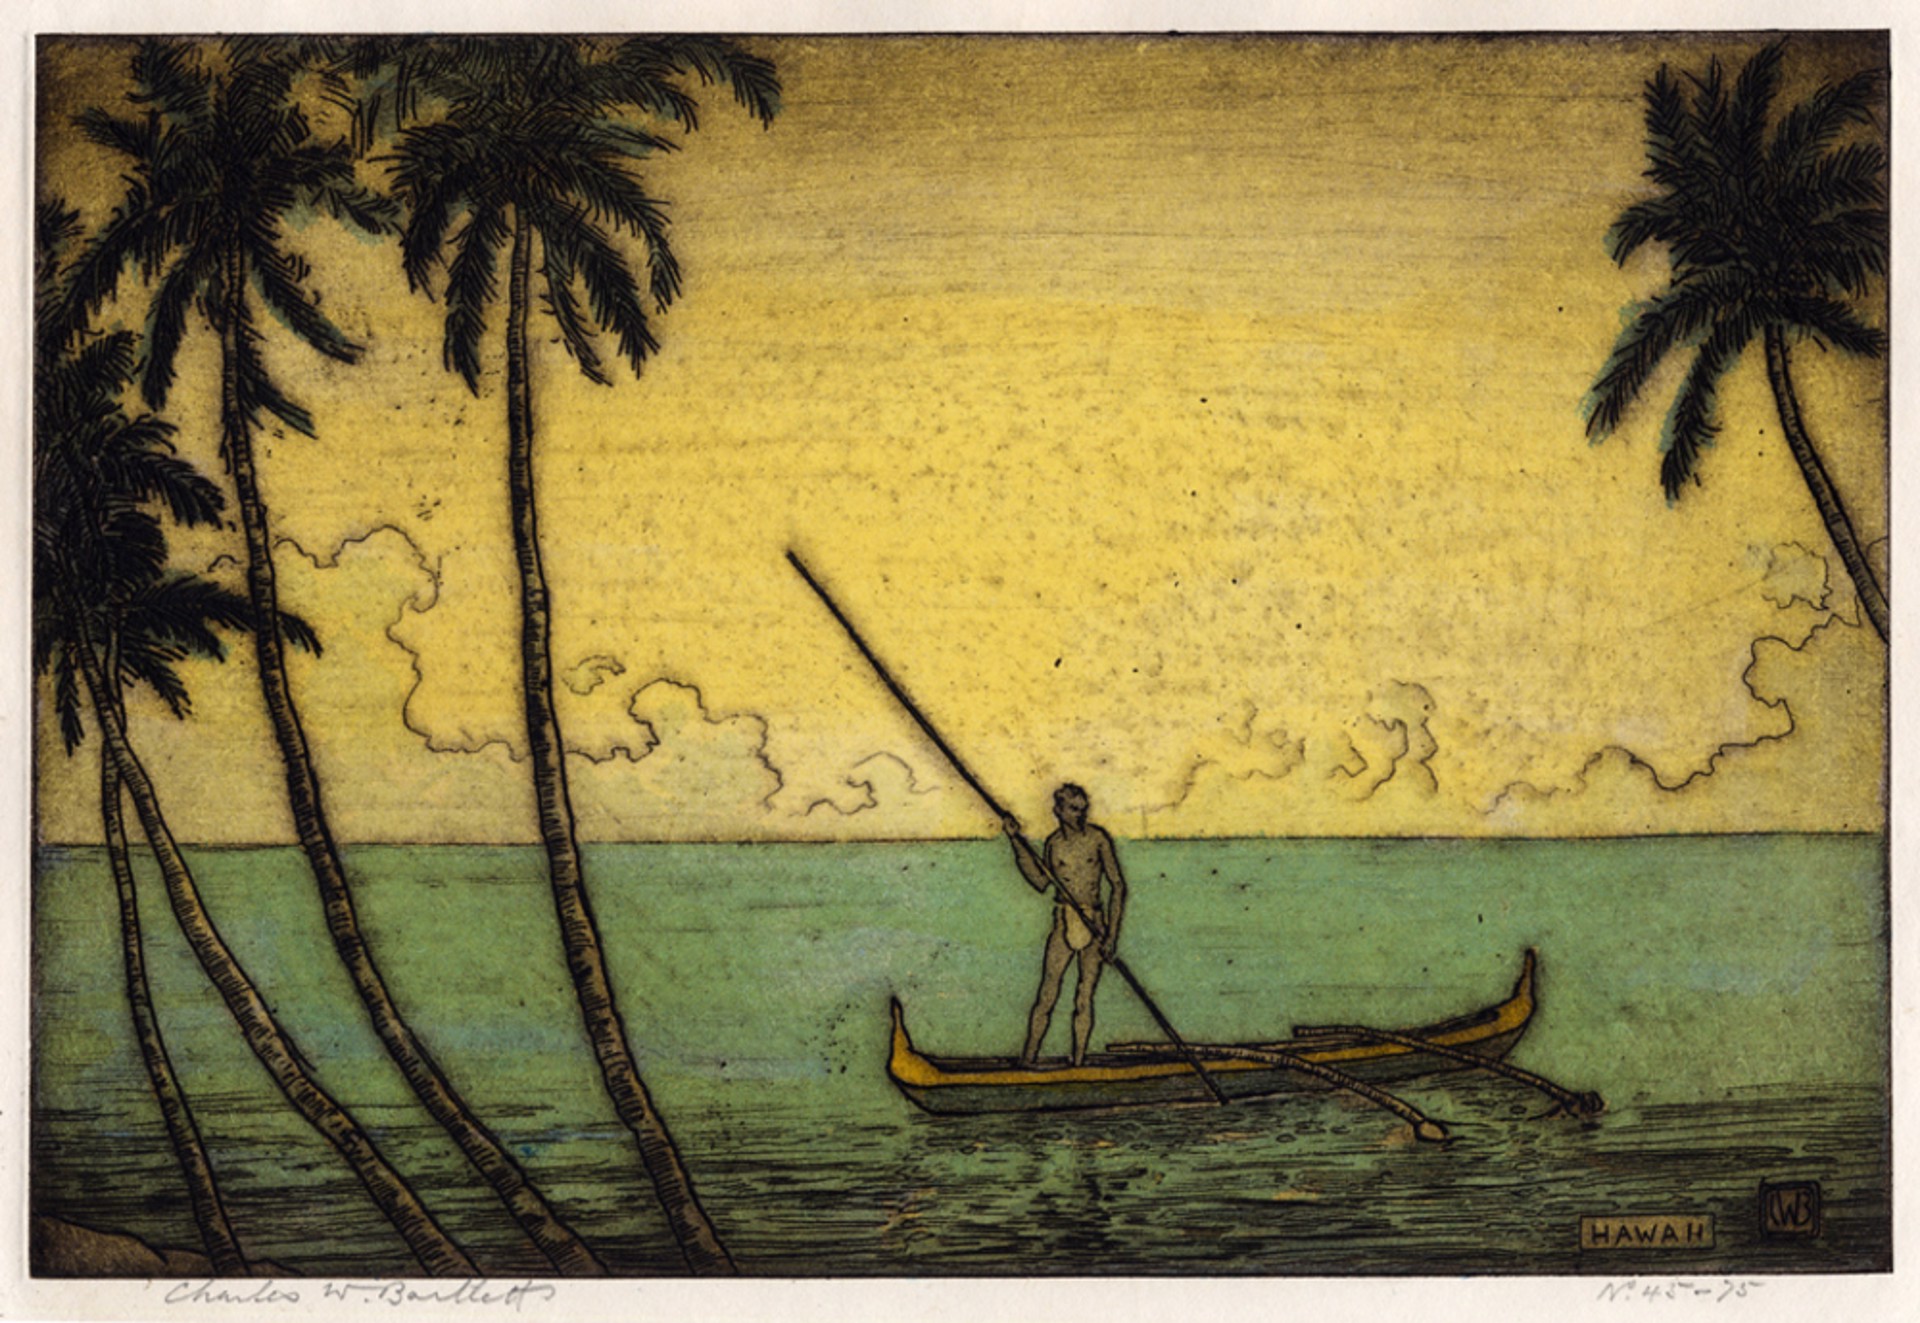 Man in Outrigger, Hawaii by Charles Bartlett